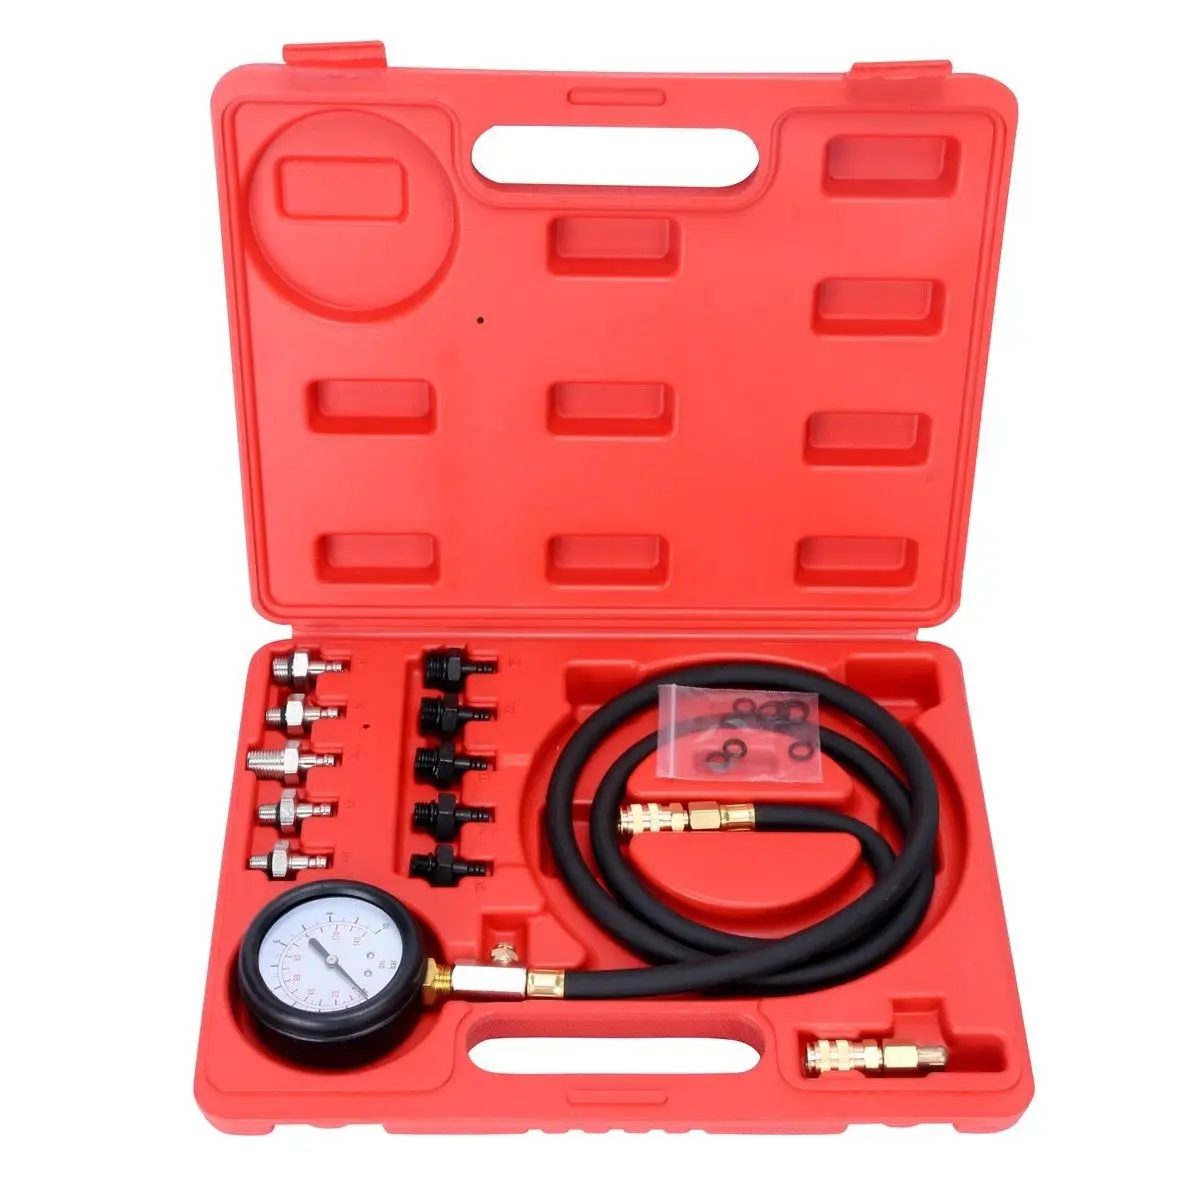 BTSHUB 12 Pieces 0-500 psi Automatic Engine Oil Pressure and Transmission Fluid Diagnostic Tester Tool Kit 